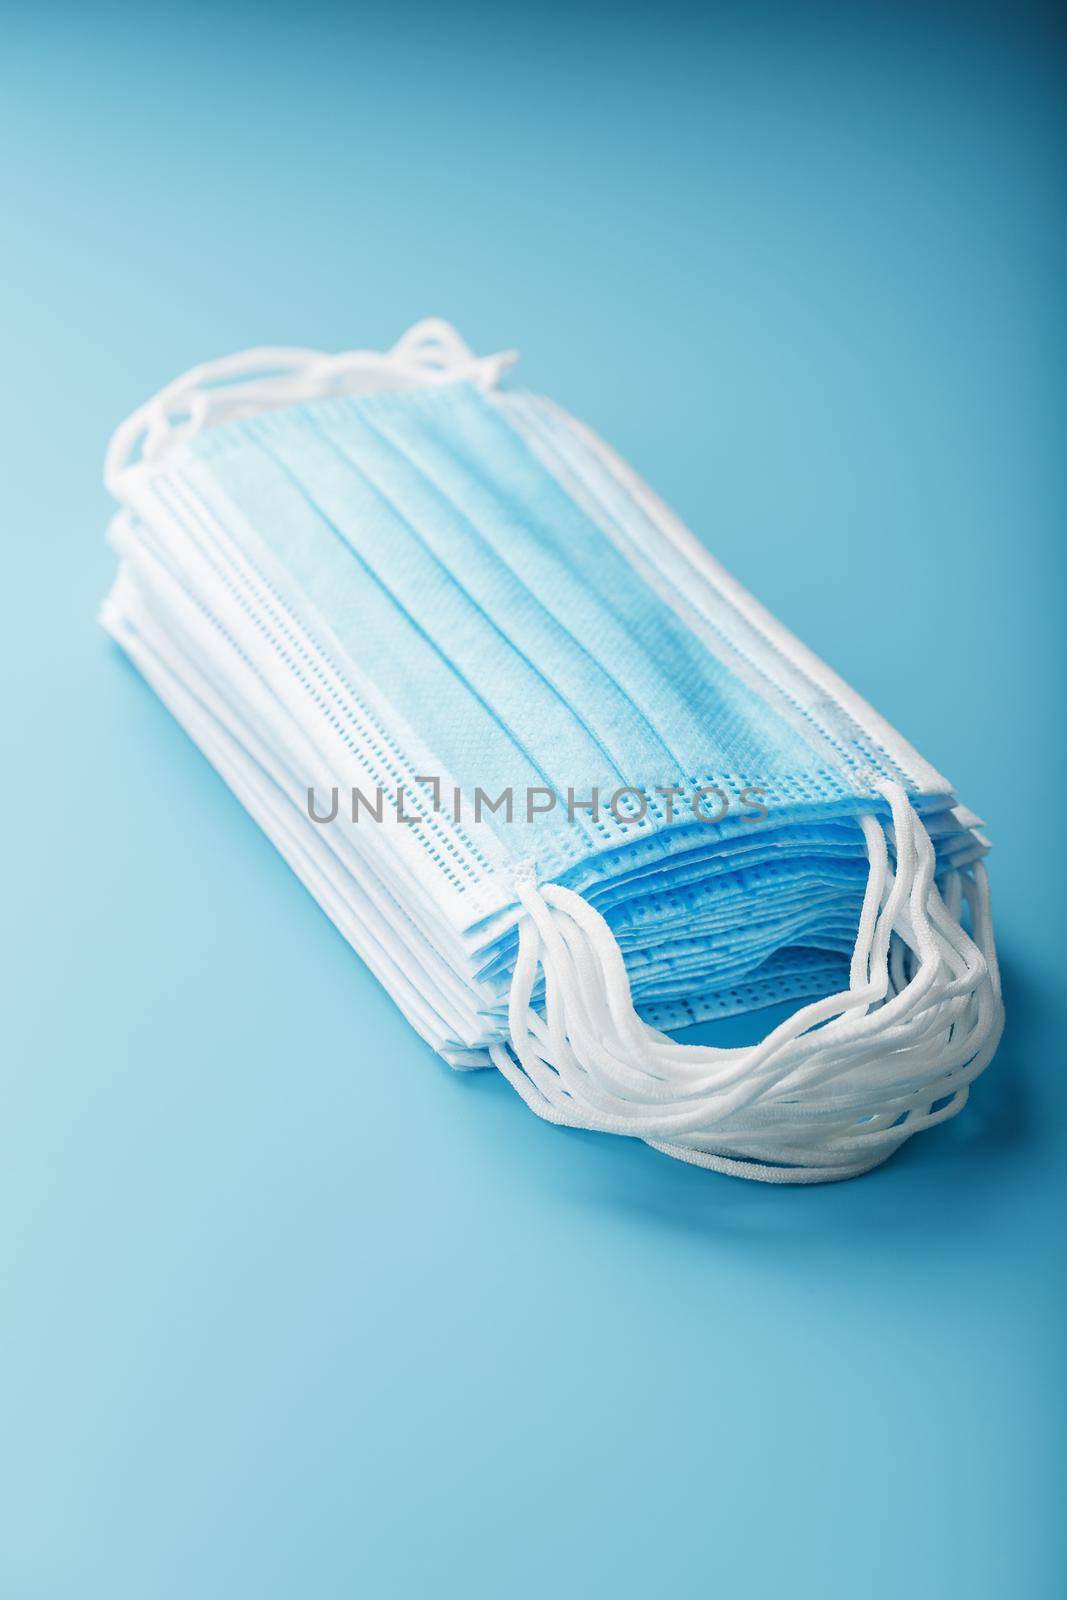 Medical protective masks on a blue background are stacked. Protection against disease, coronavirus, Covid-19, bacteria, pollution, influenza virus.